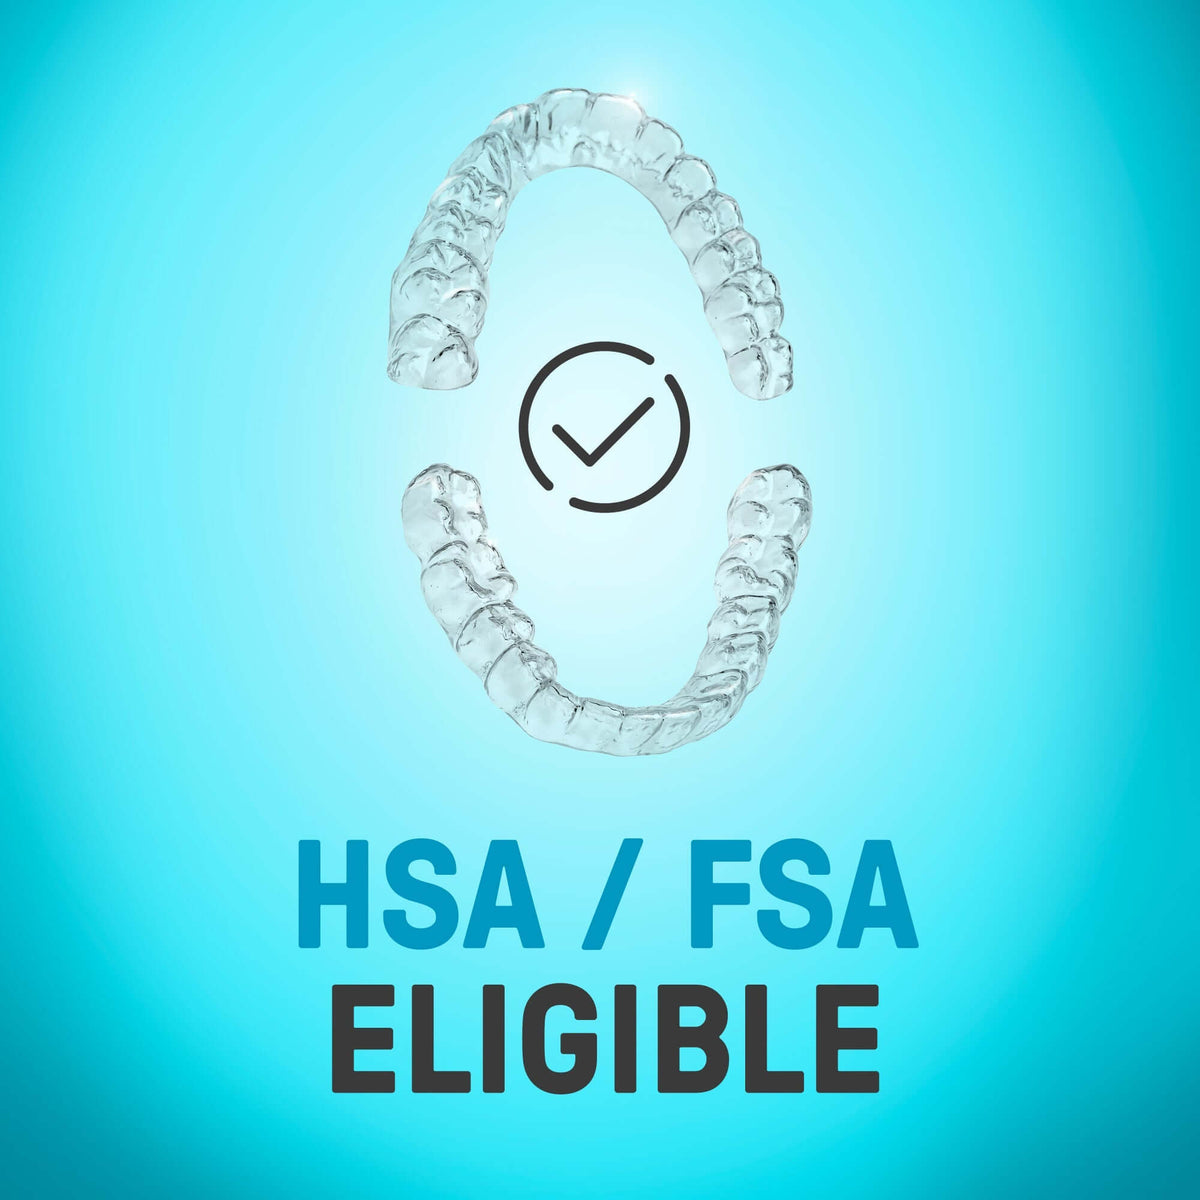 Custom Clear Removable Retainers are Hsa / fsa eligible.